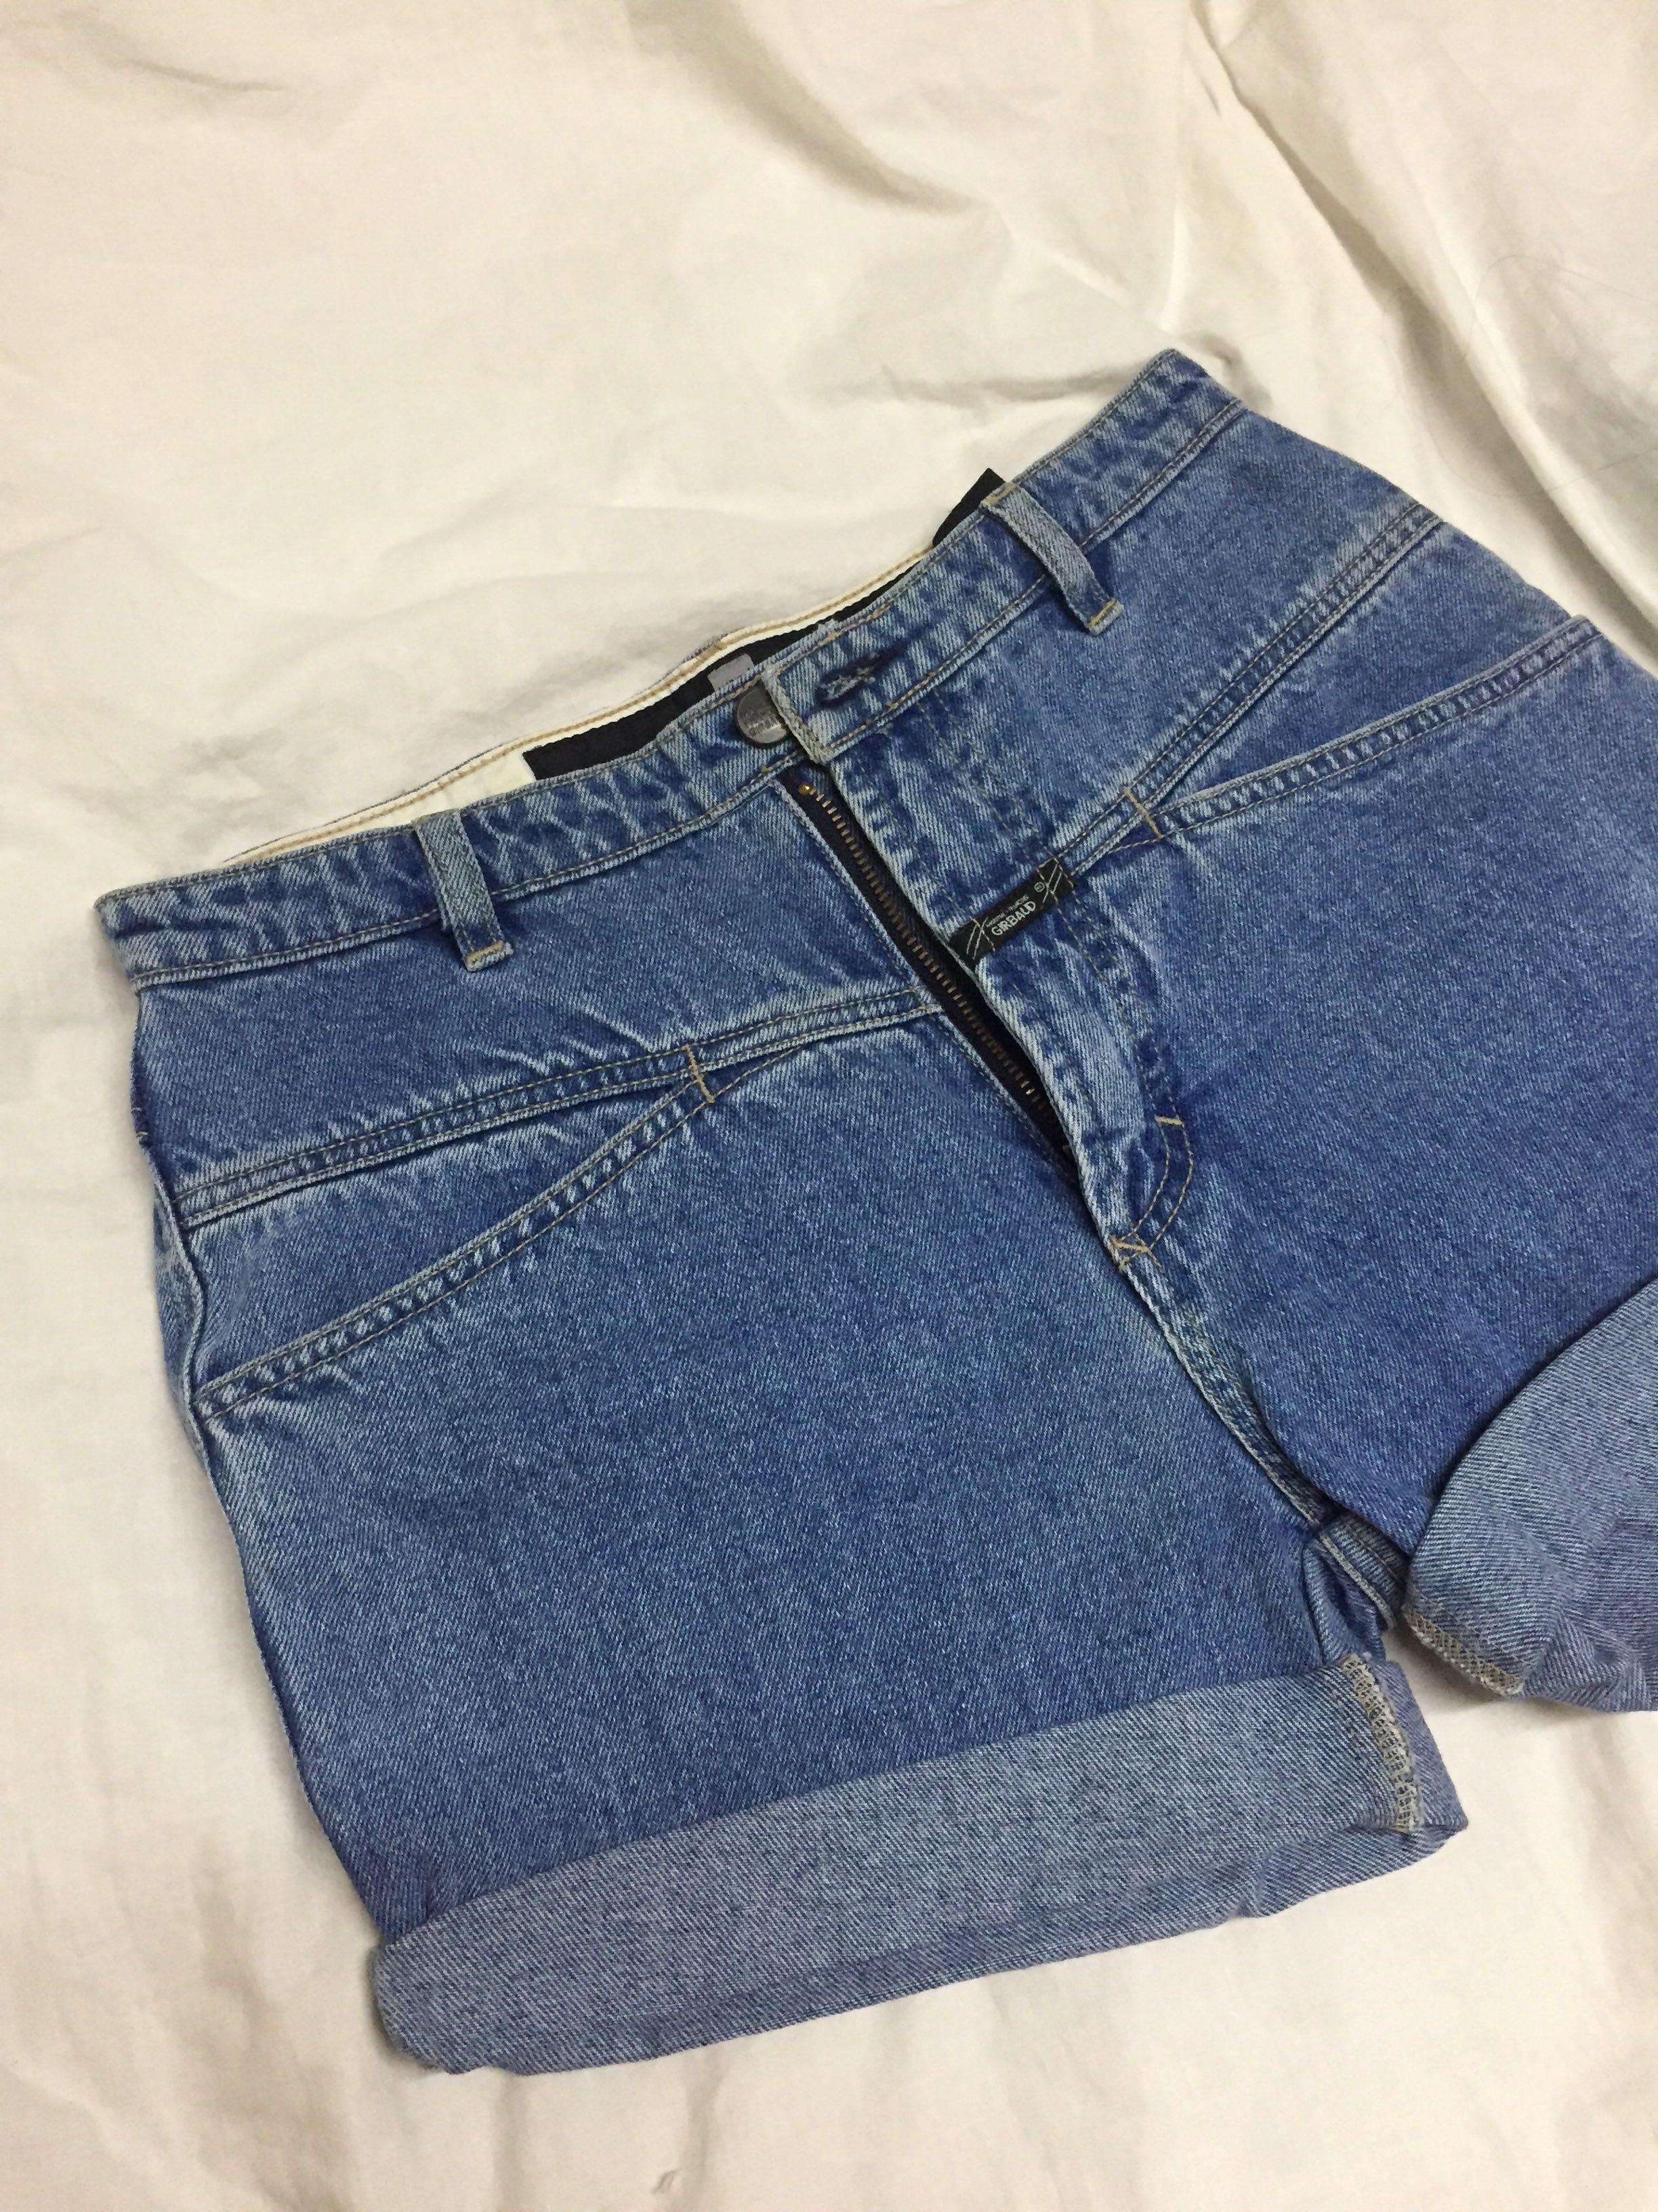 girbaud jeans shorts